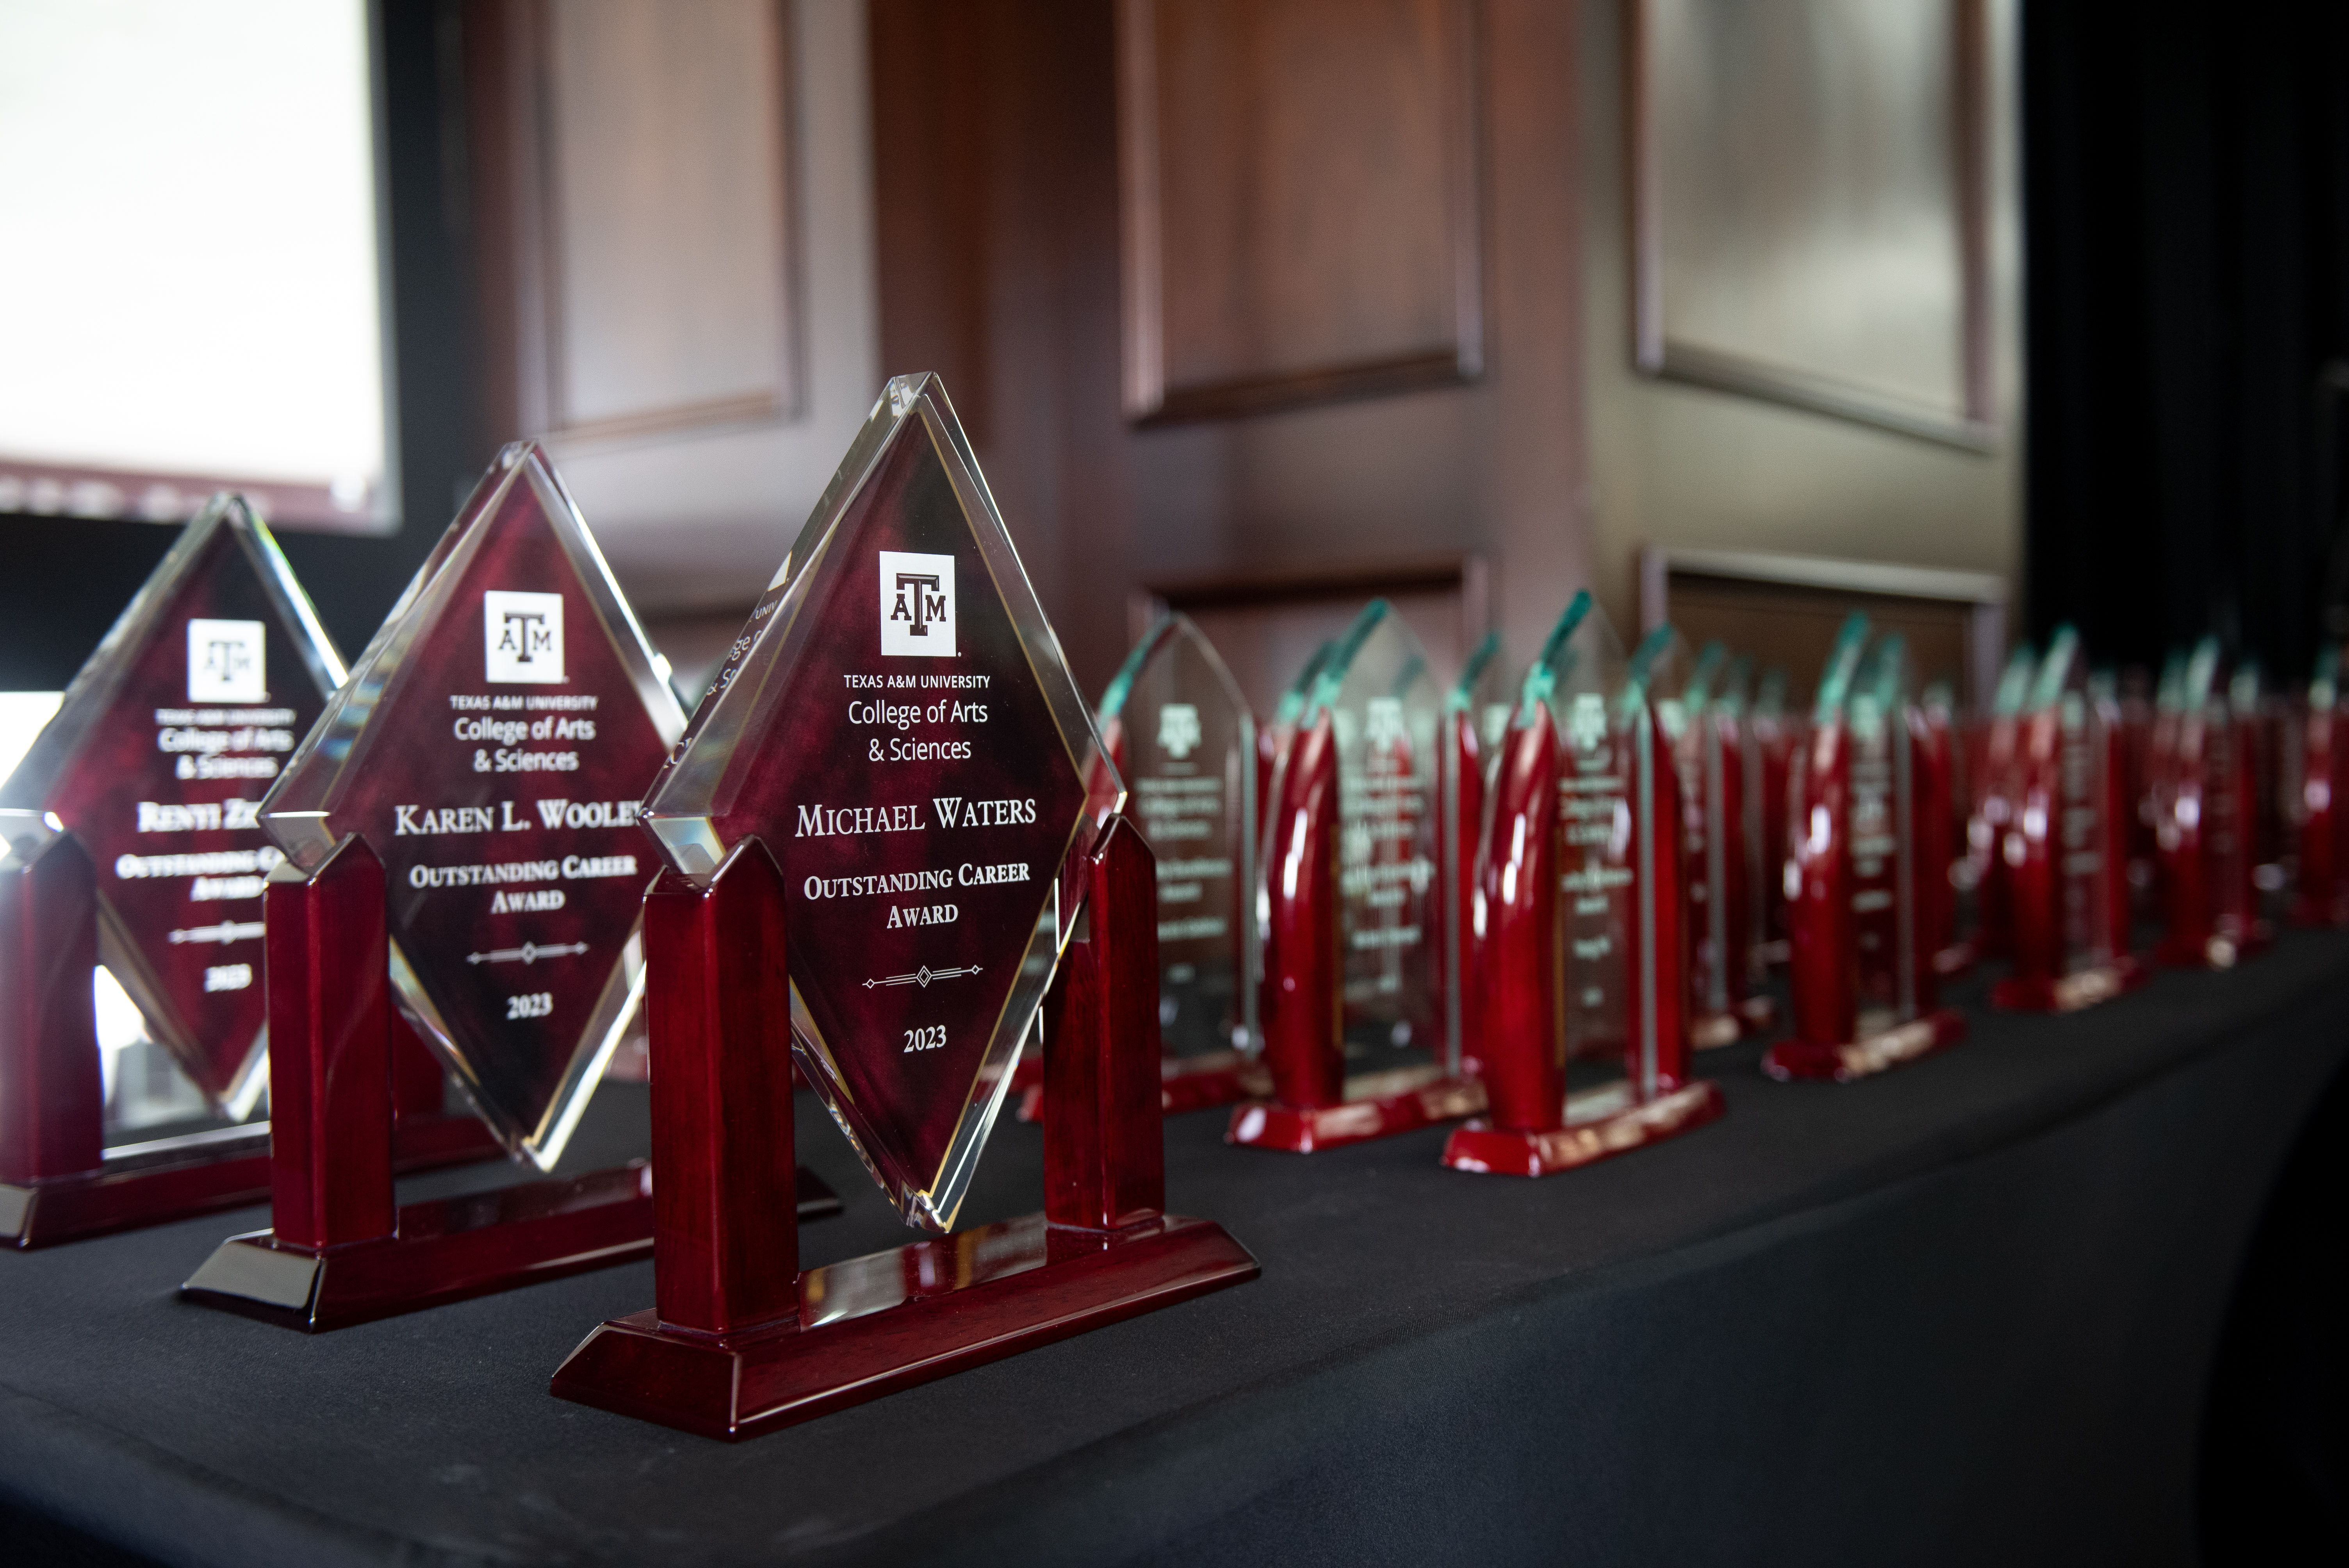 Plaques honoring Texas A&M University College of Arts and Sciences award winners lined up on table awaiting presentation 